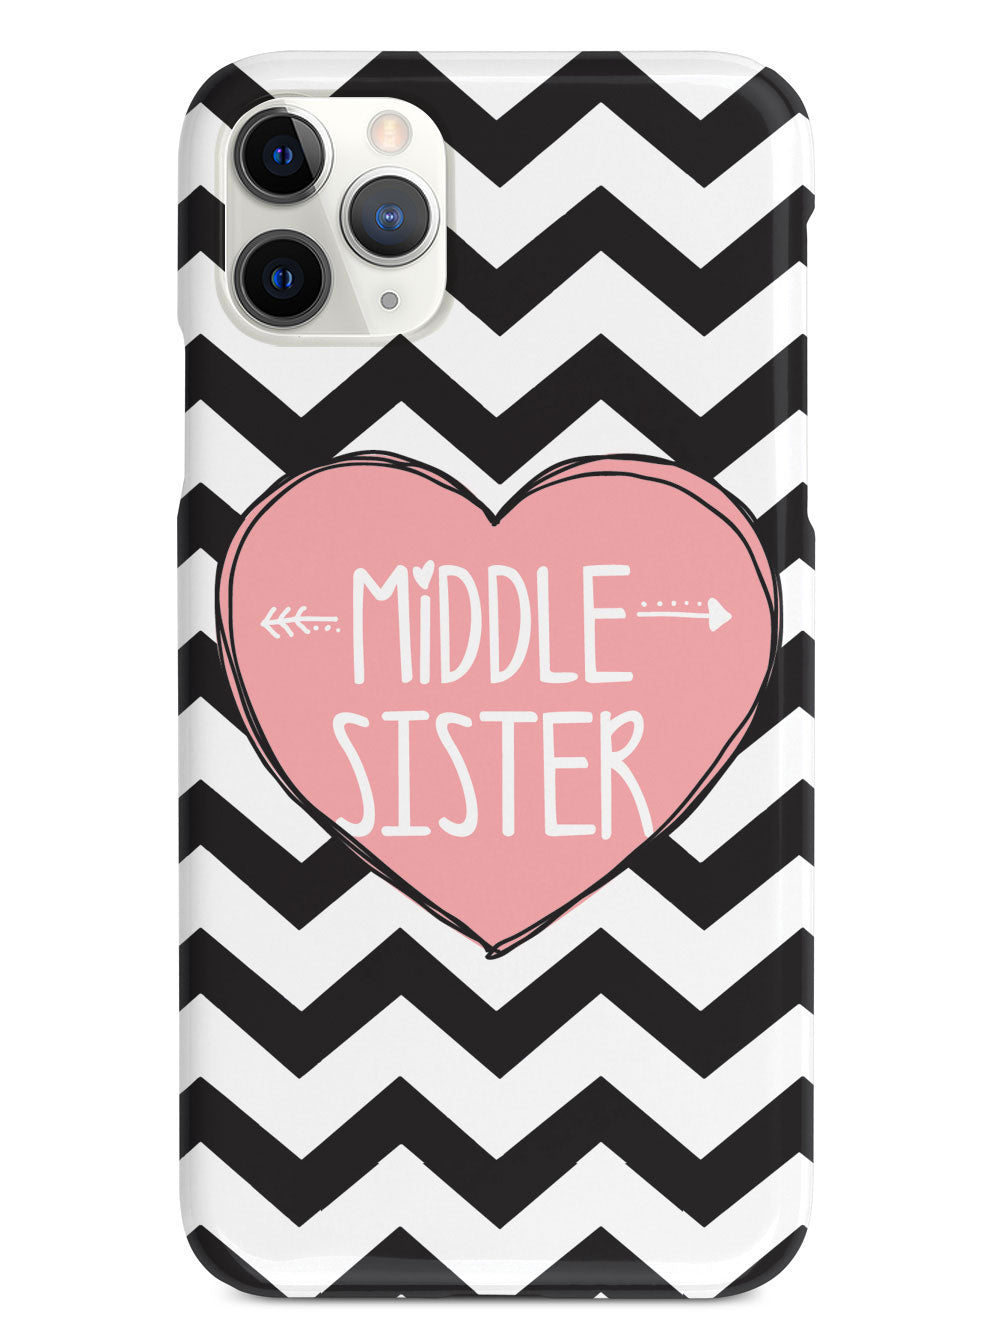 Sisterly Love - Middle Sister - Chevron Case